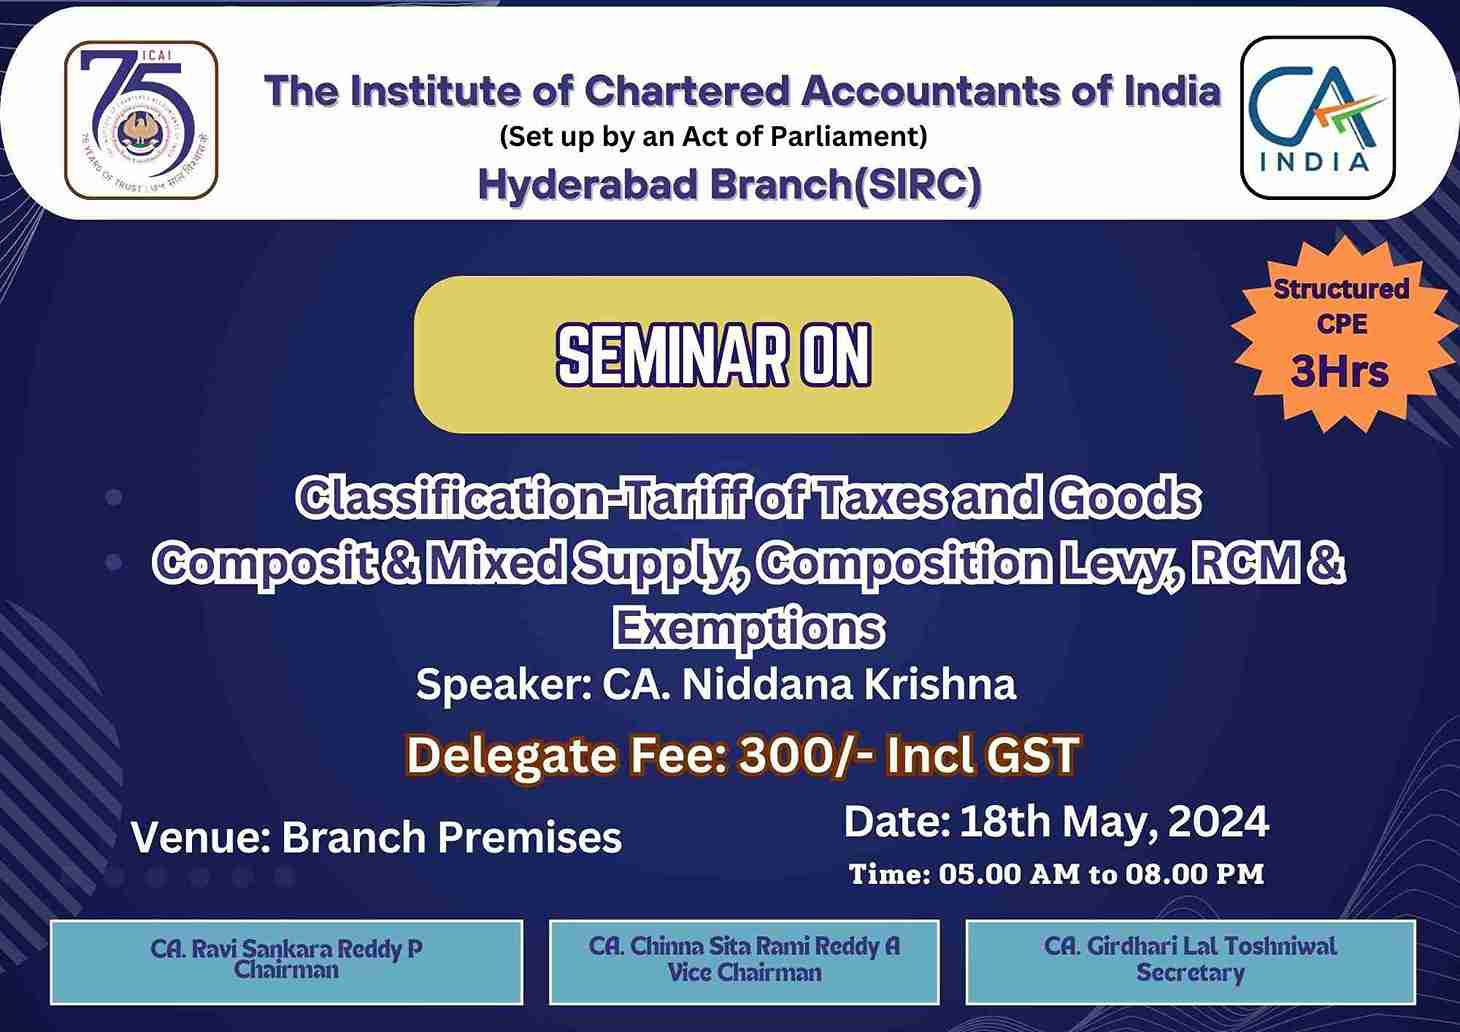 Seminar on Classification-Tariff of Taxes and Goods Composit & Mixed Supply, Composition Levy, RCM & Exemptions